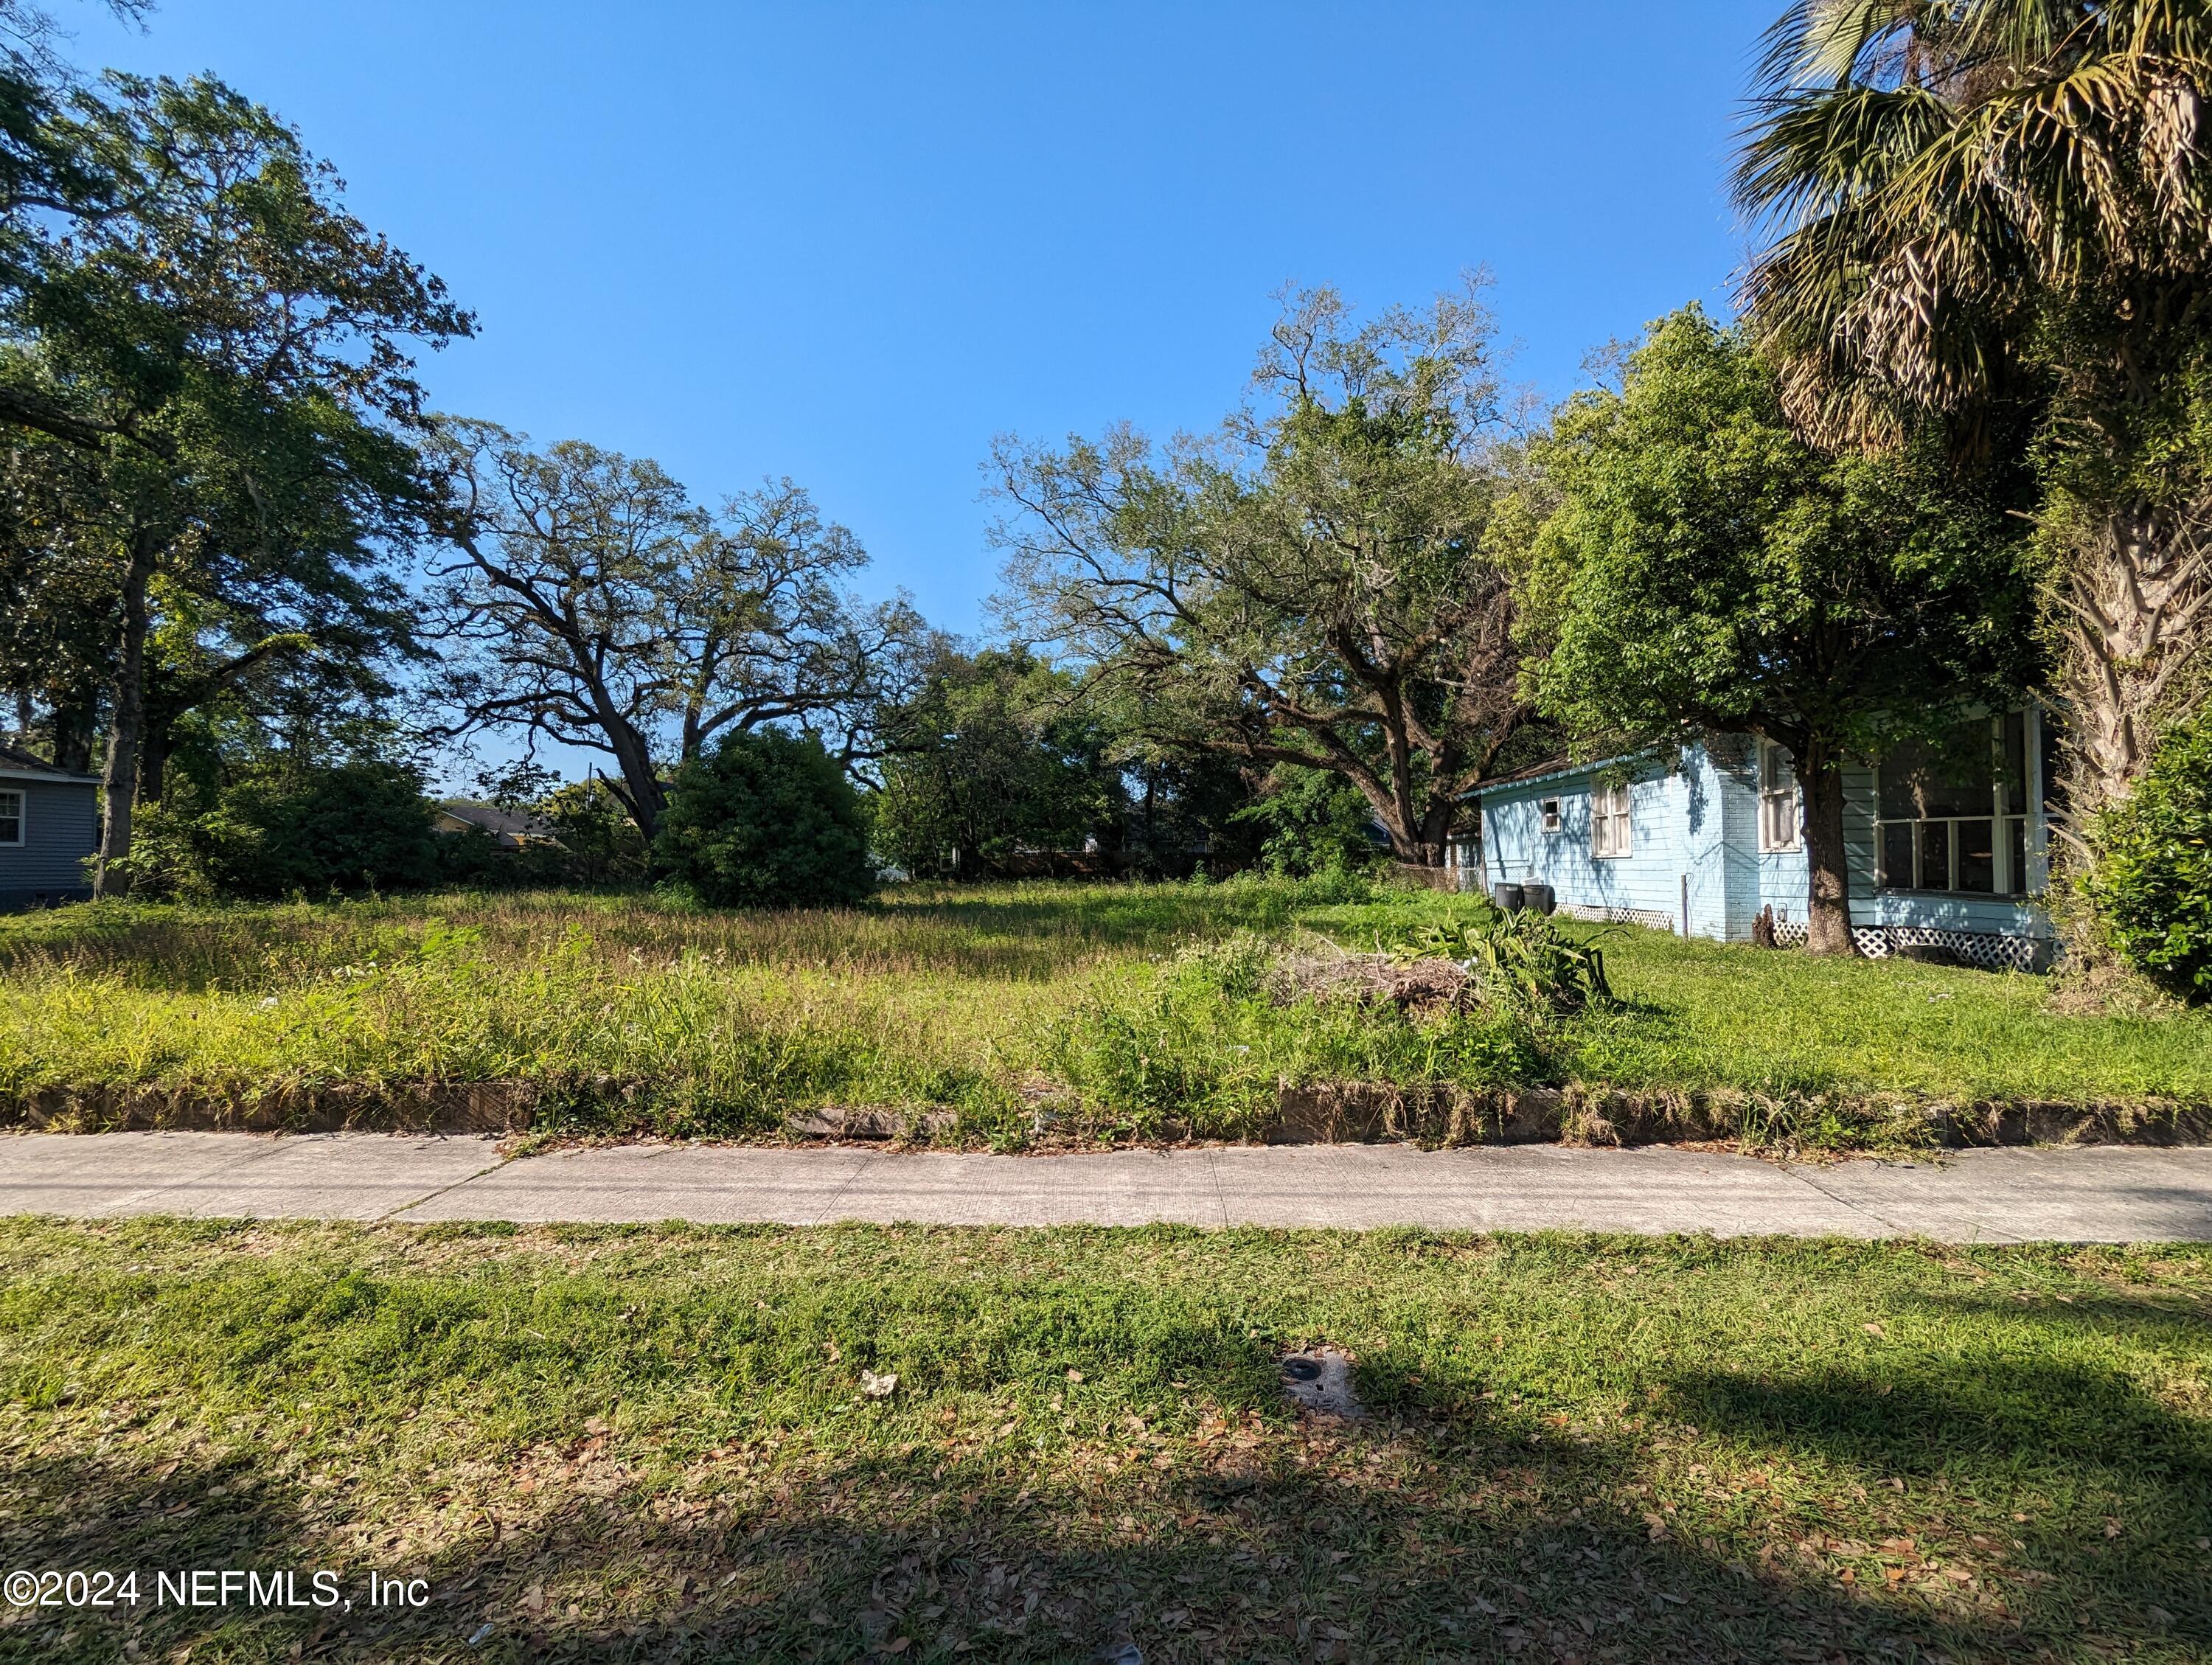 Jacksonville, FL home for sale located at 1137 E 12th Street, Jacksonville, FL 32206